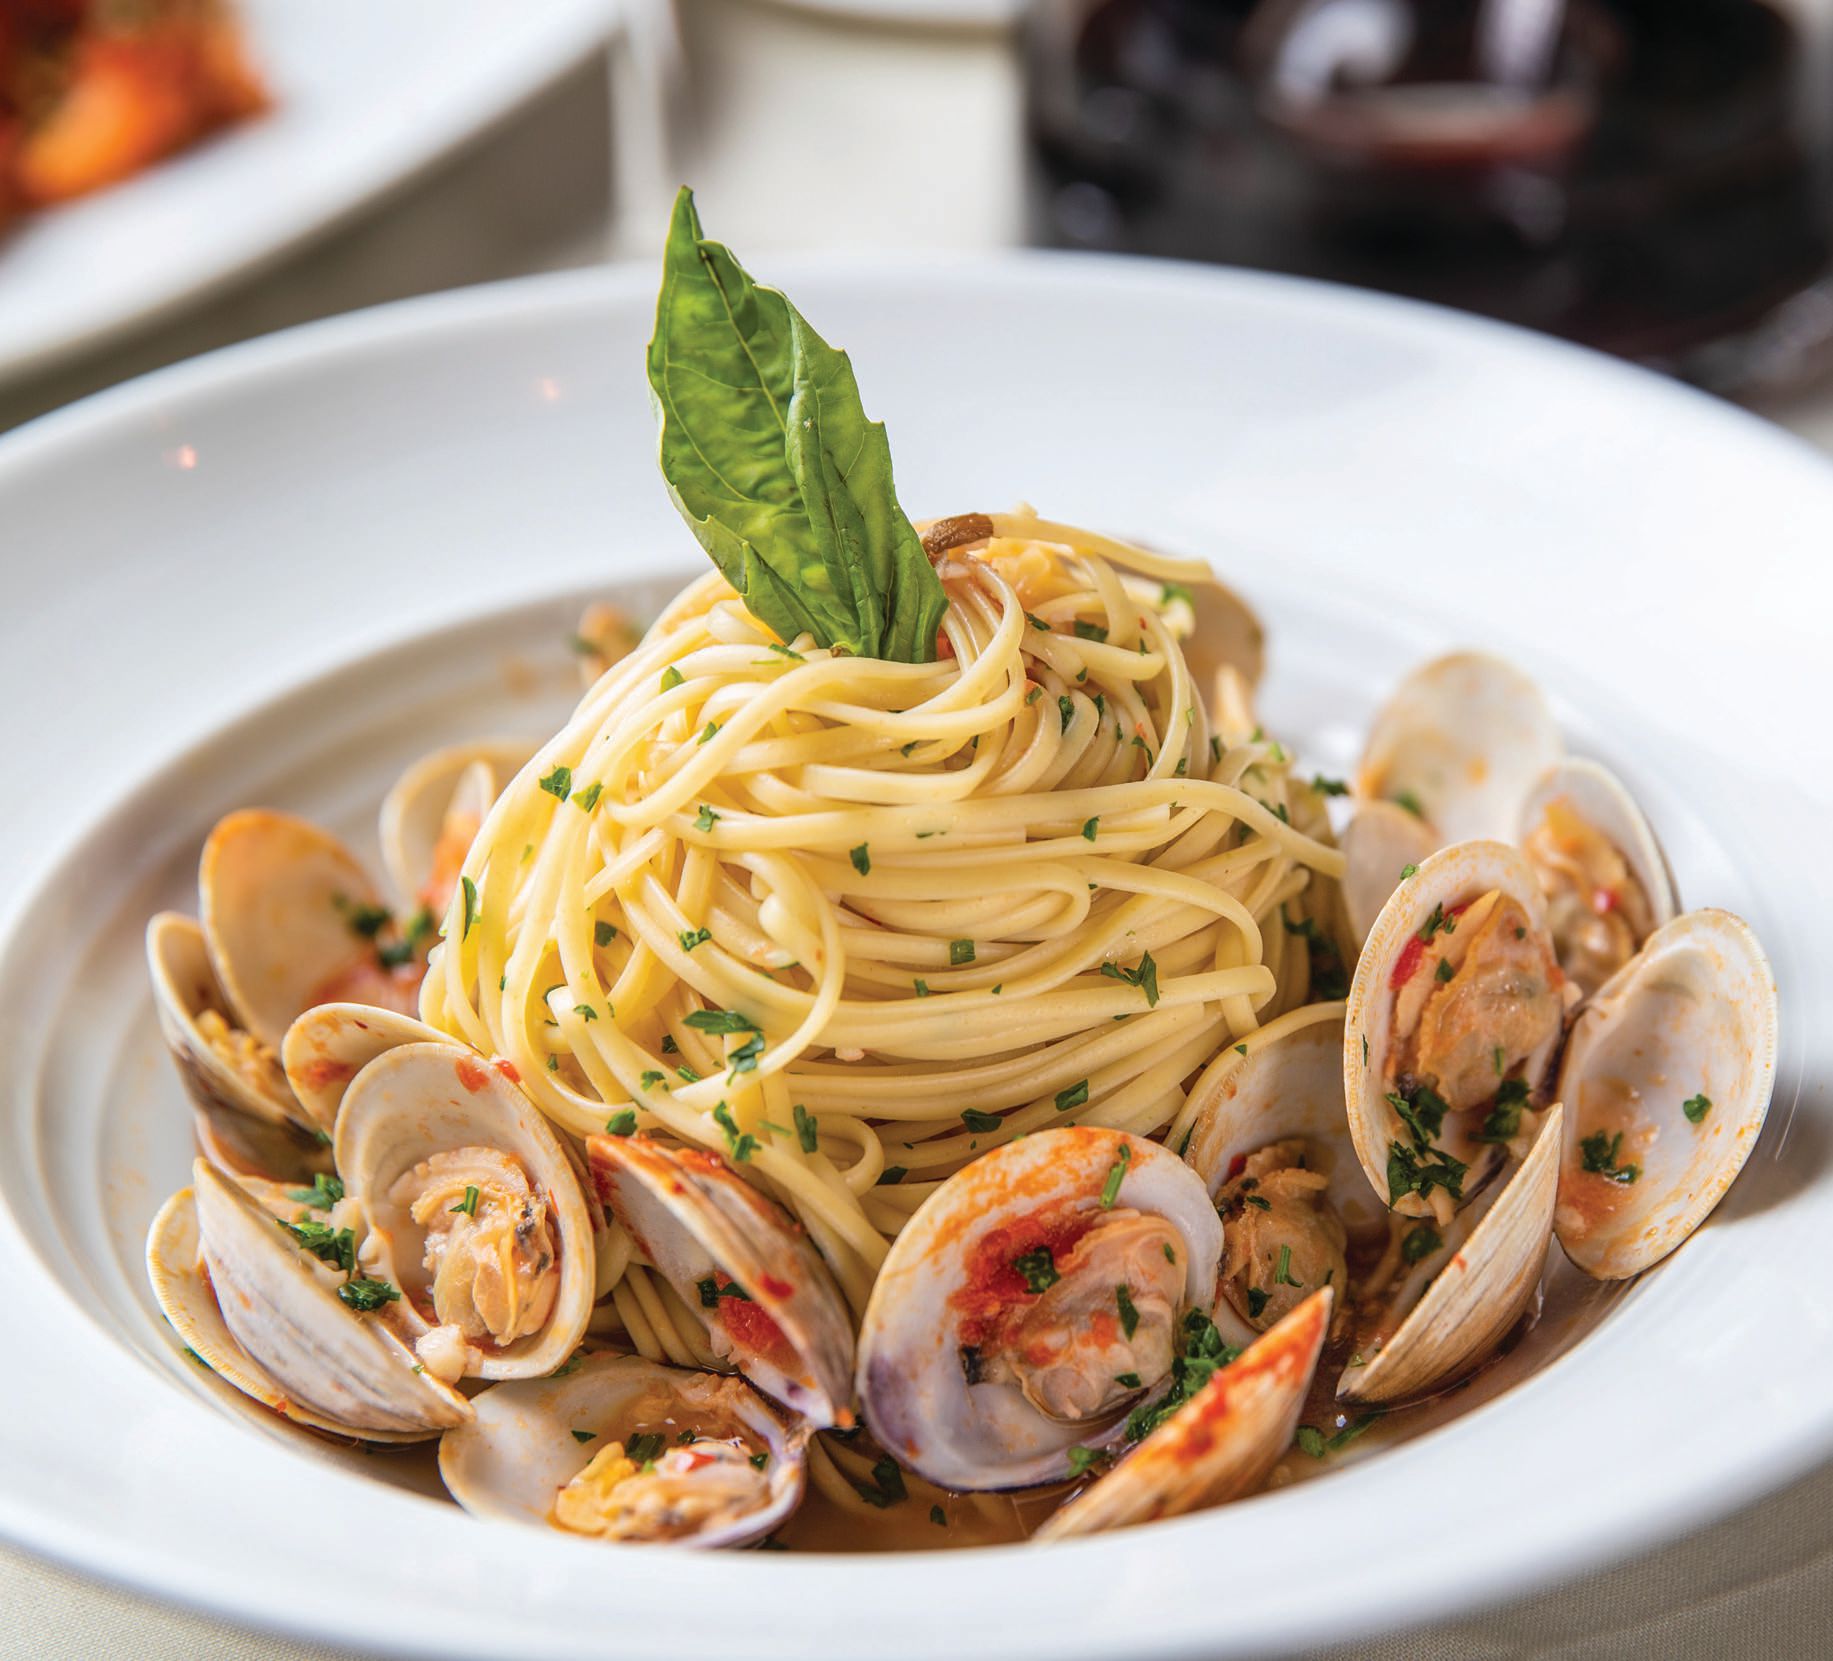 Piero’s linguine and clams features middleneck clams, white wine, garlic and a red or white broth. PHOTO BY TONY TRAN